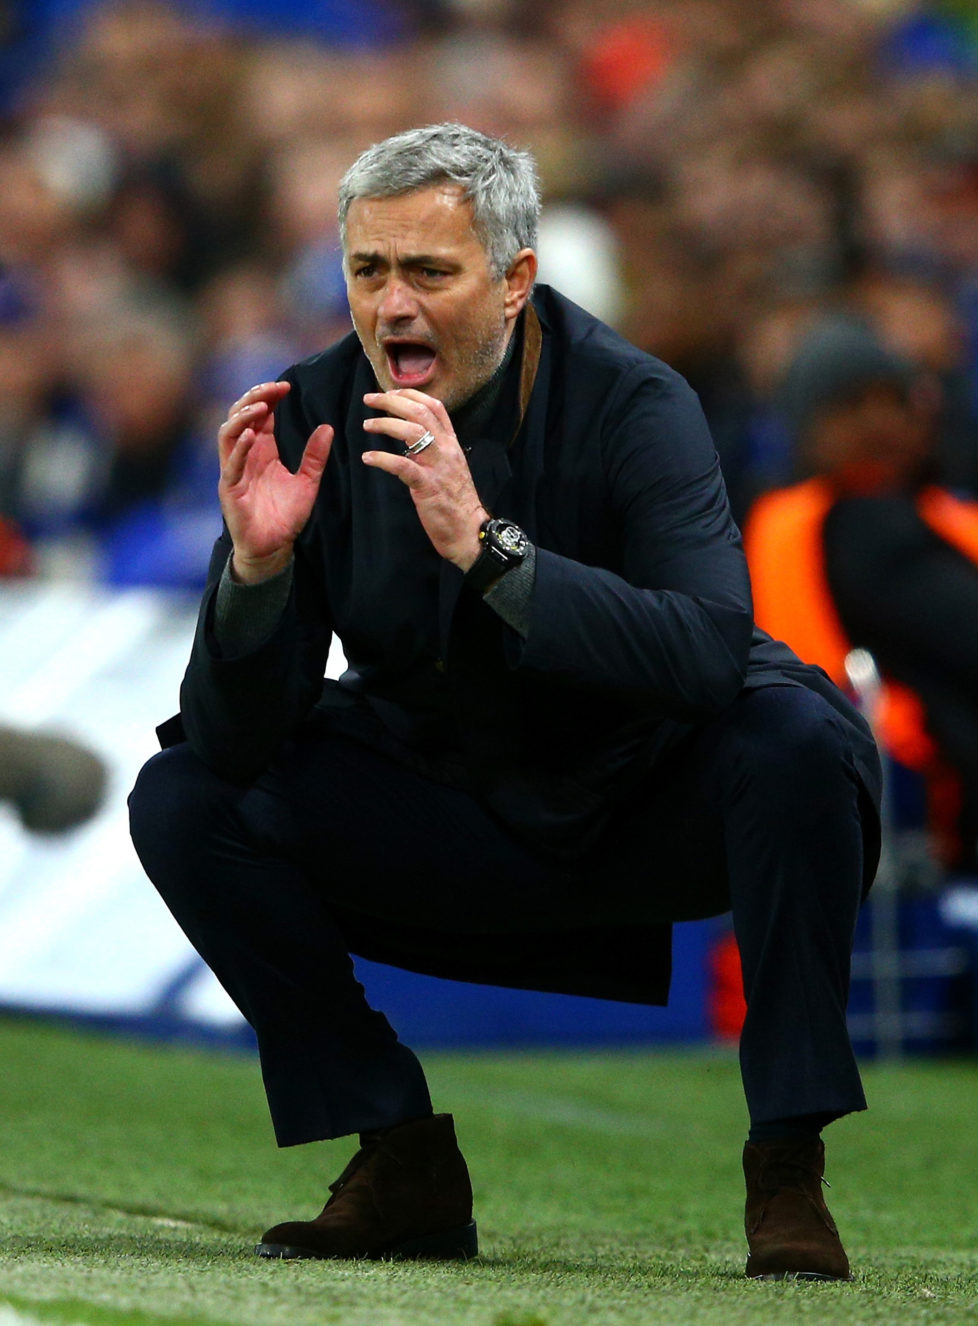 LONDON, ENGLAND - DECEMBER 09: Jose Mourinho manager of Chelsea reacts during the UEFA Champions League Group G match between Chelsea FC and FC Porto at Stamford Bridge on December 9, 2015 in London, United Kingdom. (Photo by Clive Mason/Getty Images)